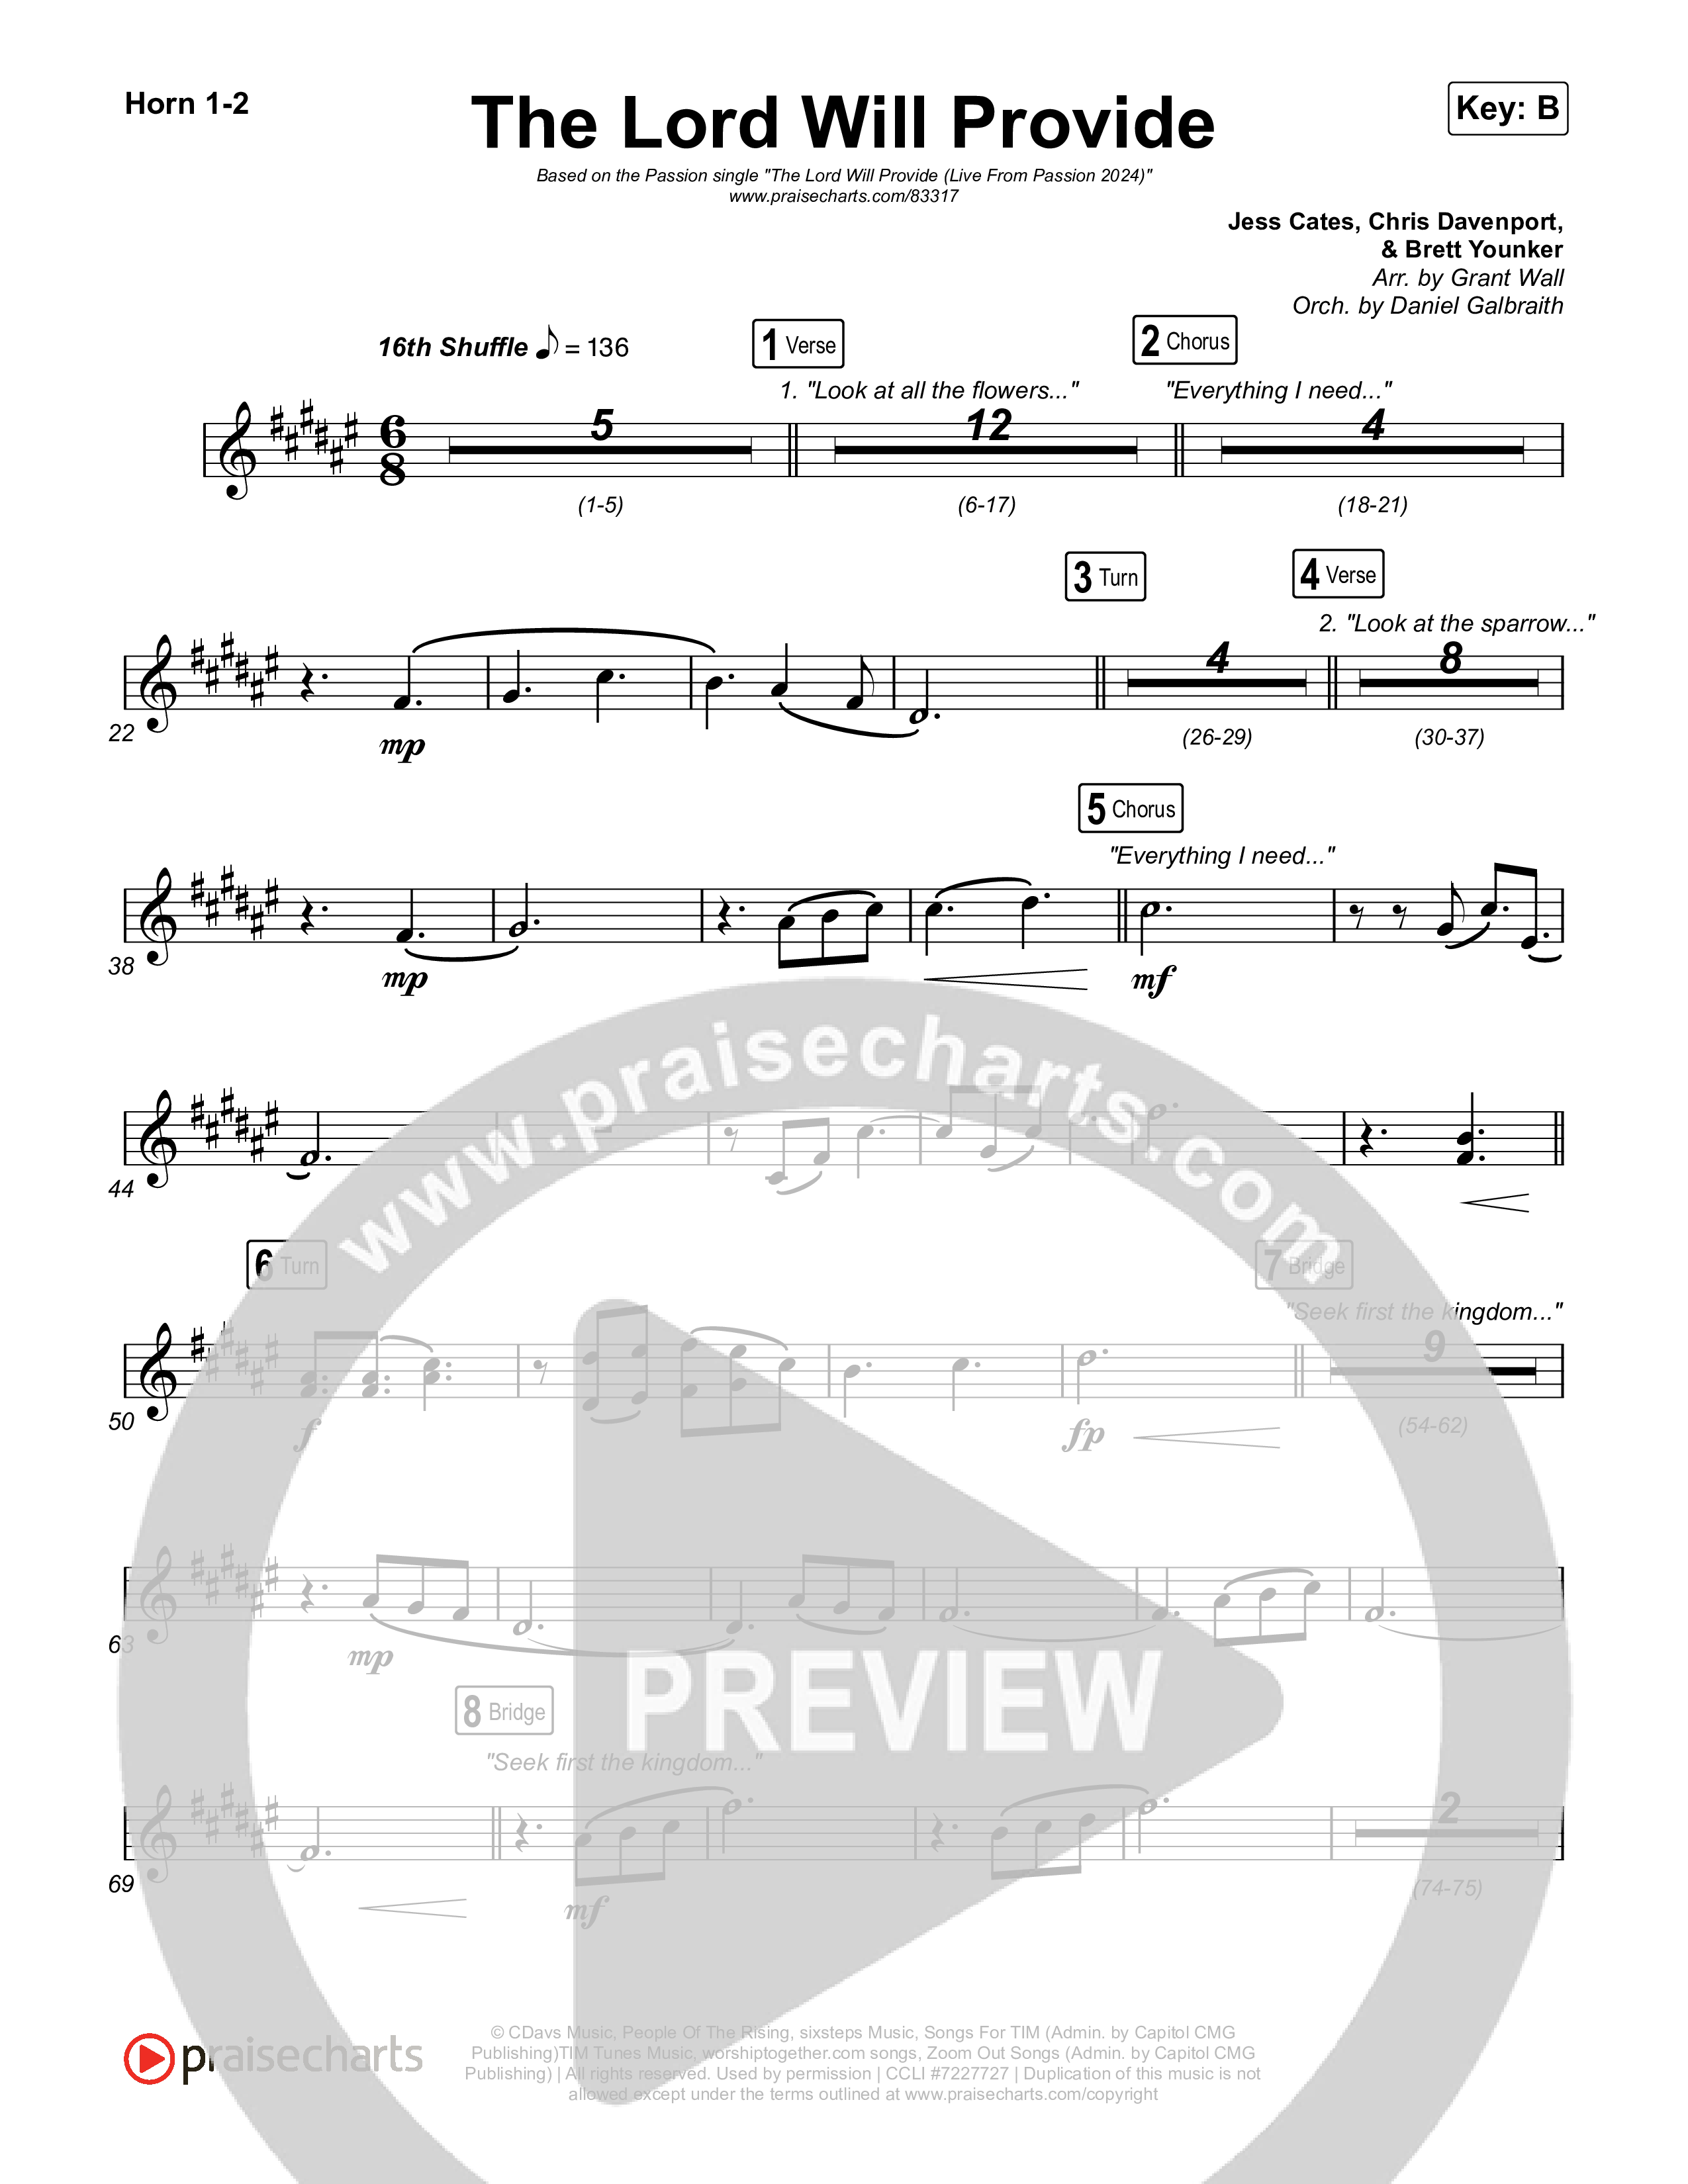 The Lord Will Provide French Horn 1,2 (Passion / Landon Wolfe)